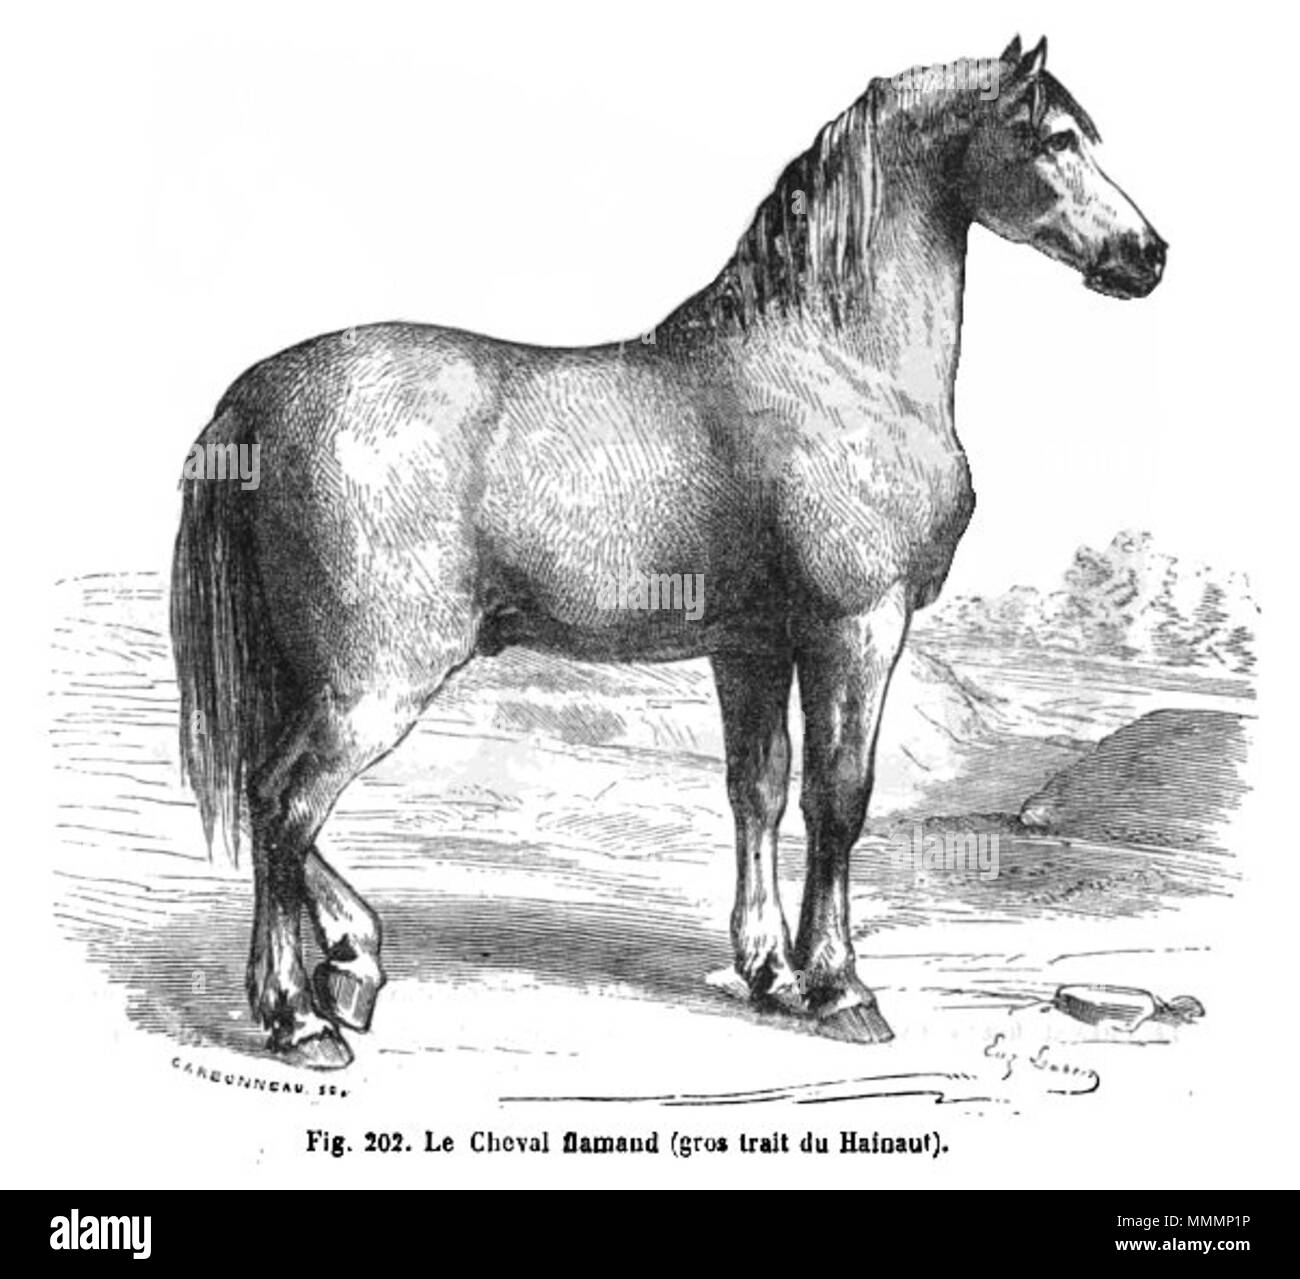 . Français : Cheval flamand English: Flemish Horse  . 1869.   Alfred Brehm  (1829–1884)       Alternative names Brehm; Alfred Edmund Brehm; A. E. Brehm  Description German biologist, ornithologist, zoologist, painter and writer  Date of birth/death 2 February 1829 11 November 1884  Location of birth/death Renthendorf Renthendorf  Authority control  : Q155112 VIAF:?47553366 ISNI:?0000 0001 2131 4808 LCCN:?n50065092 GND:?118514814 SELIBR:?179101 WorldCat Brehm-Cheval-flamand Stock Photo